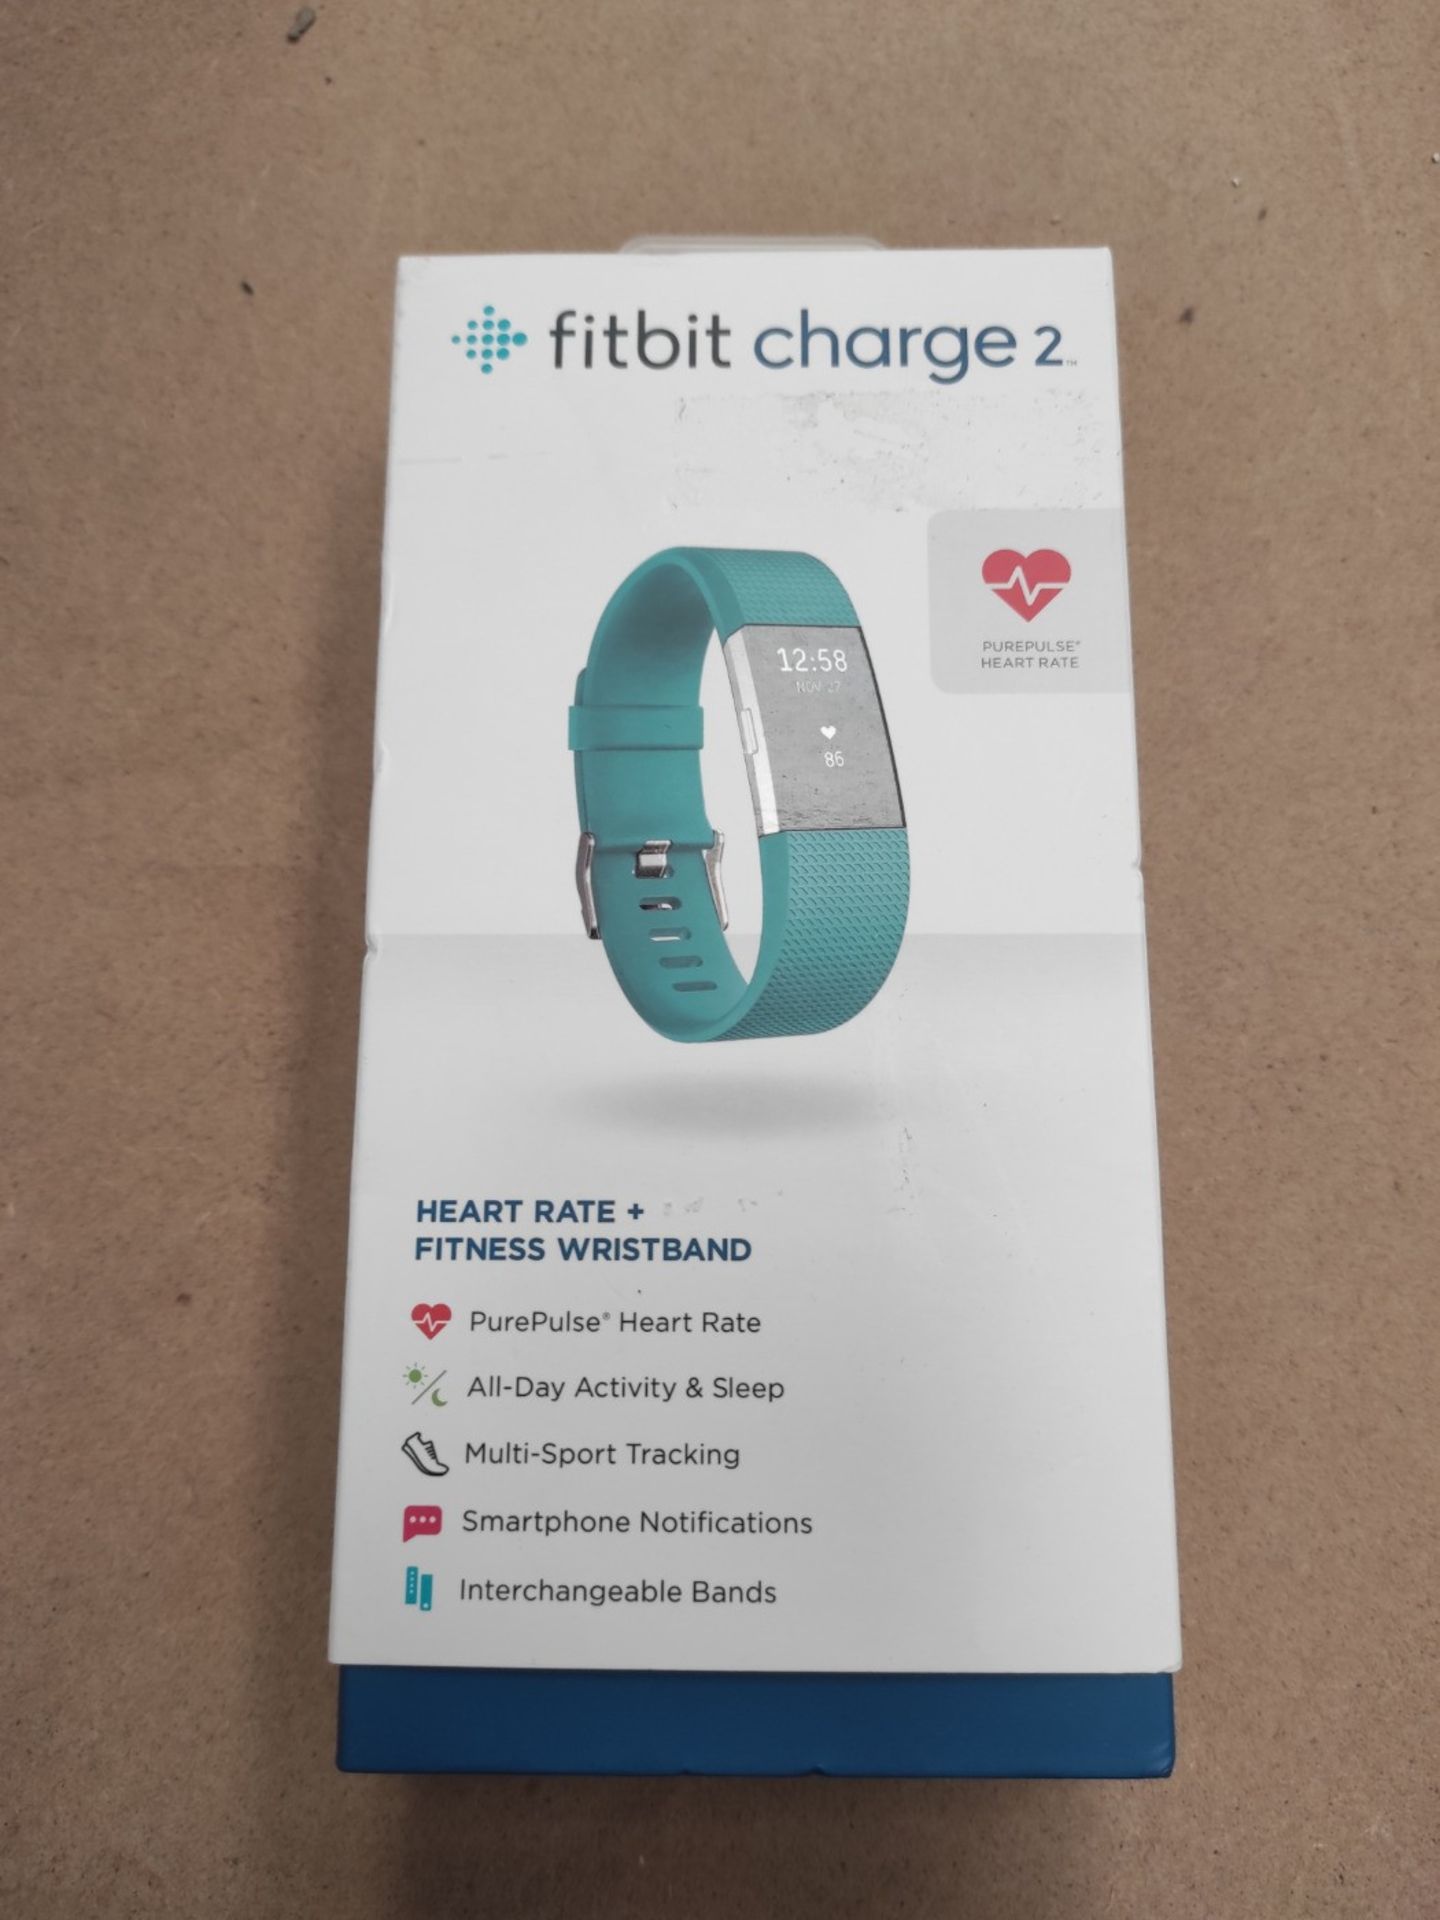 RRP £115.00 [CRACKED] Fitbit Charge 2 Activity Tracker with Wrist Based Heart Rate Monitor - Teal - Bild 2 aus 3